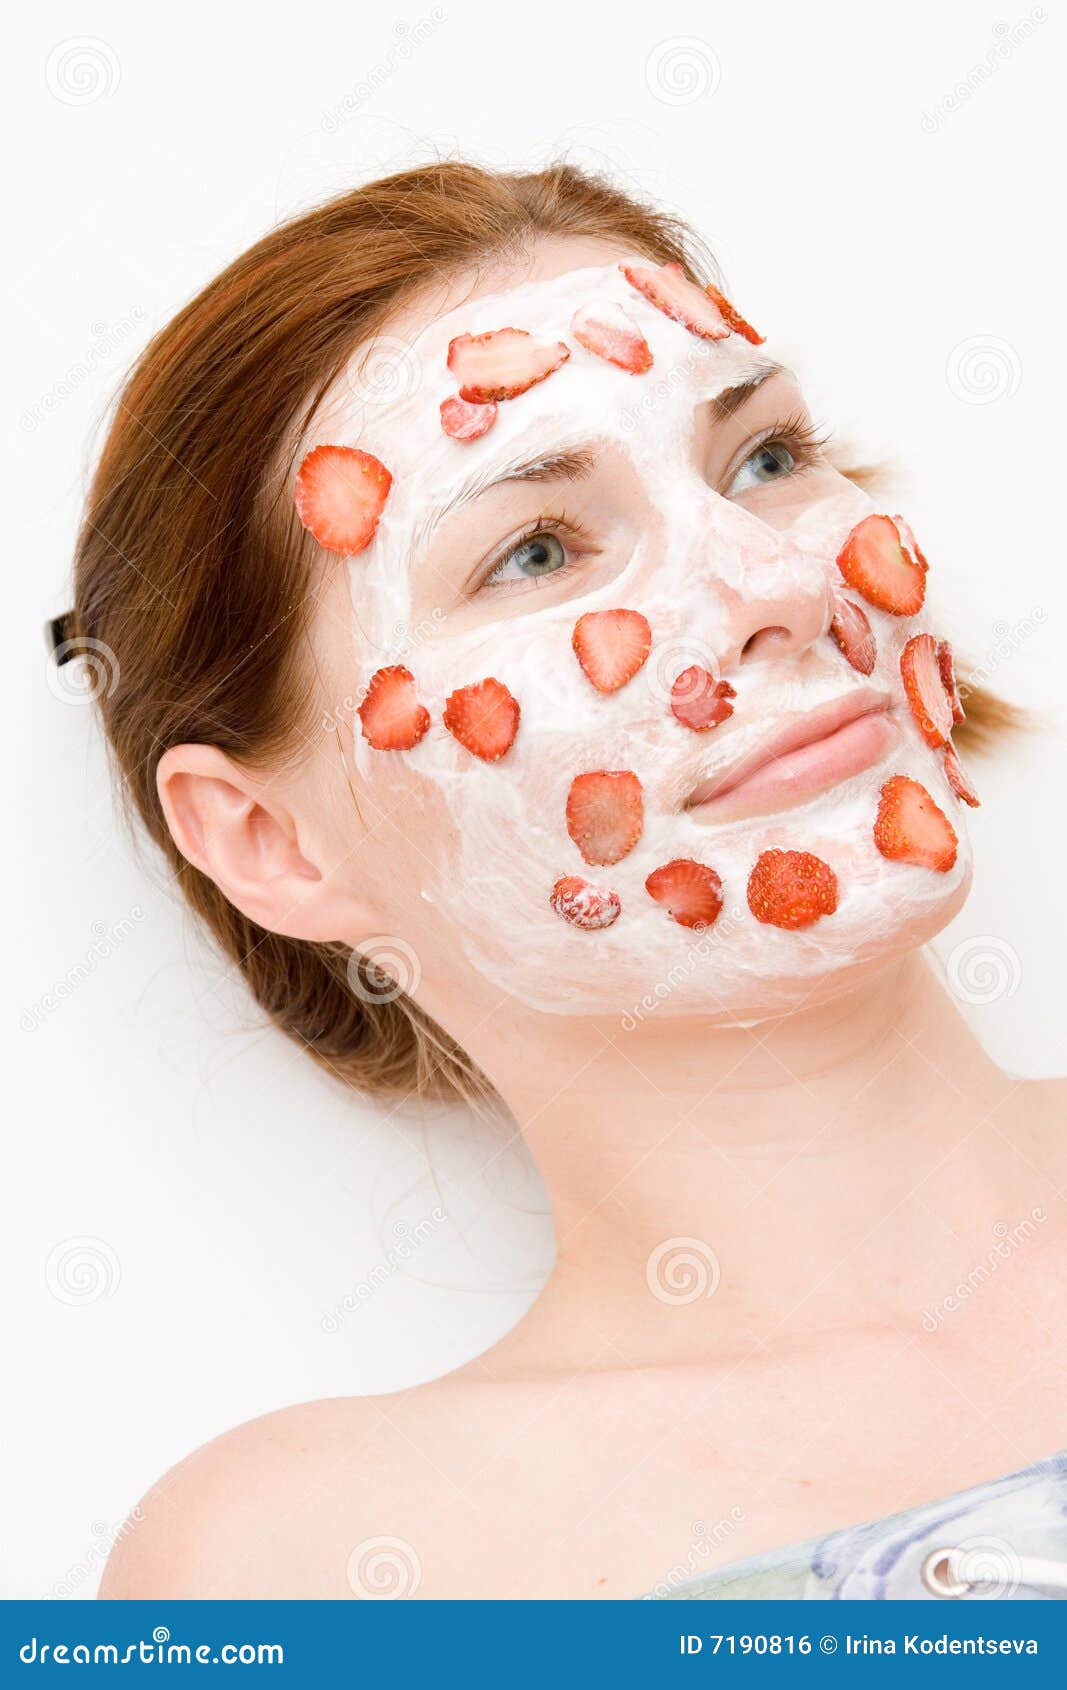 Face Pack Royalty Free Stock Image - Image: 7190816